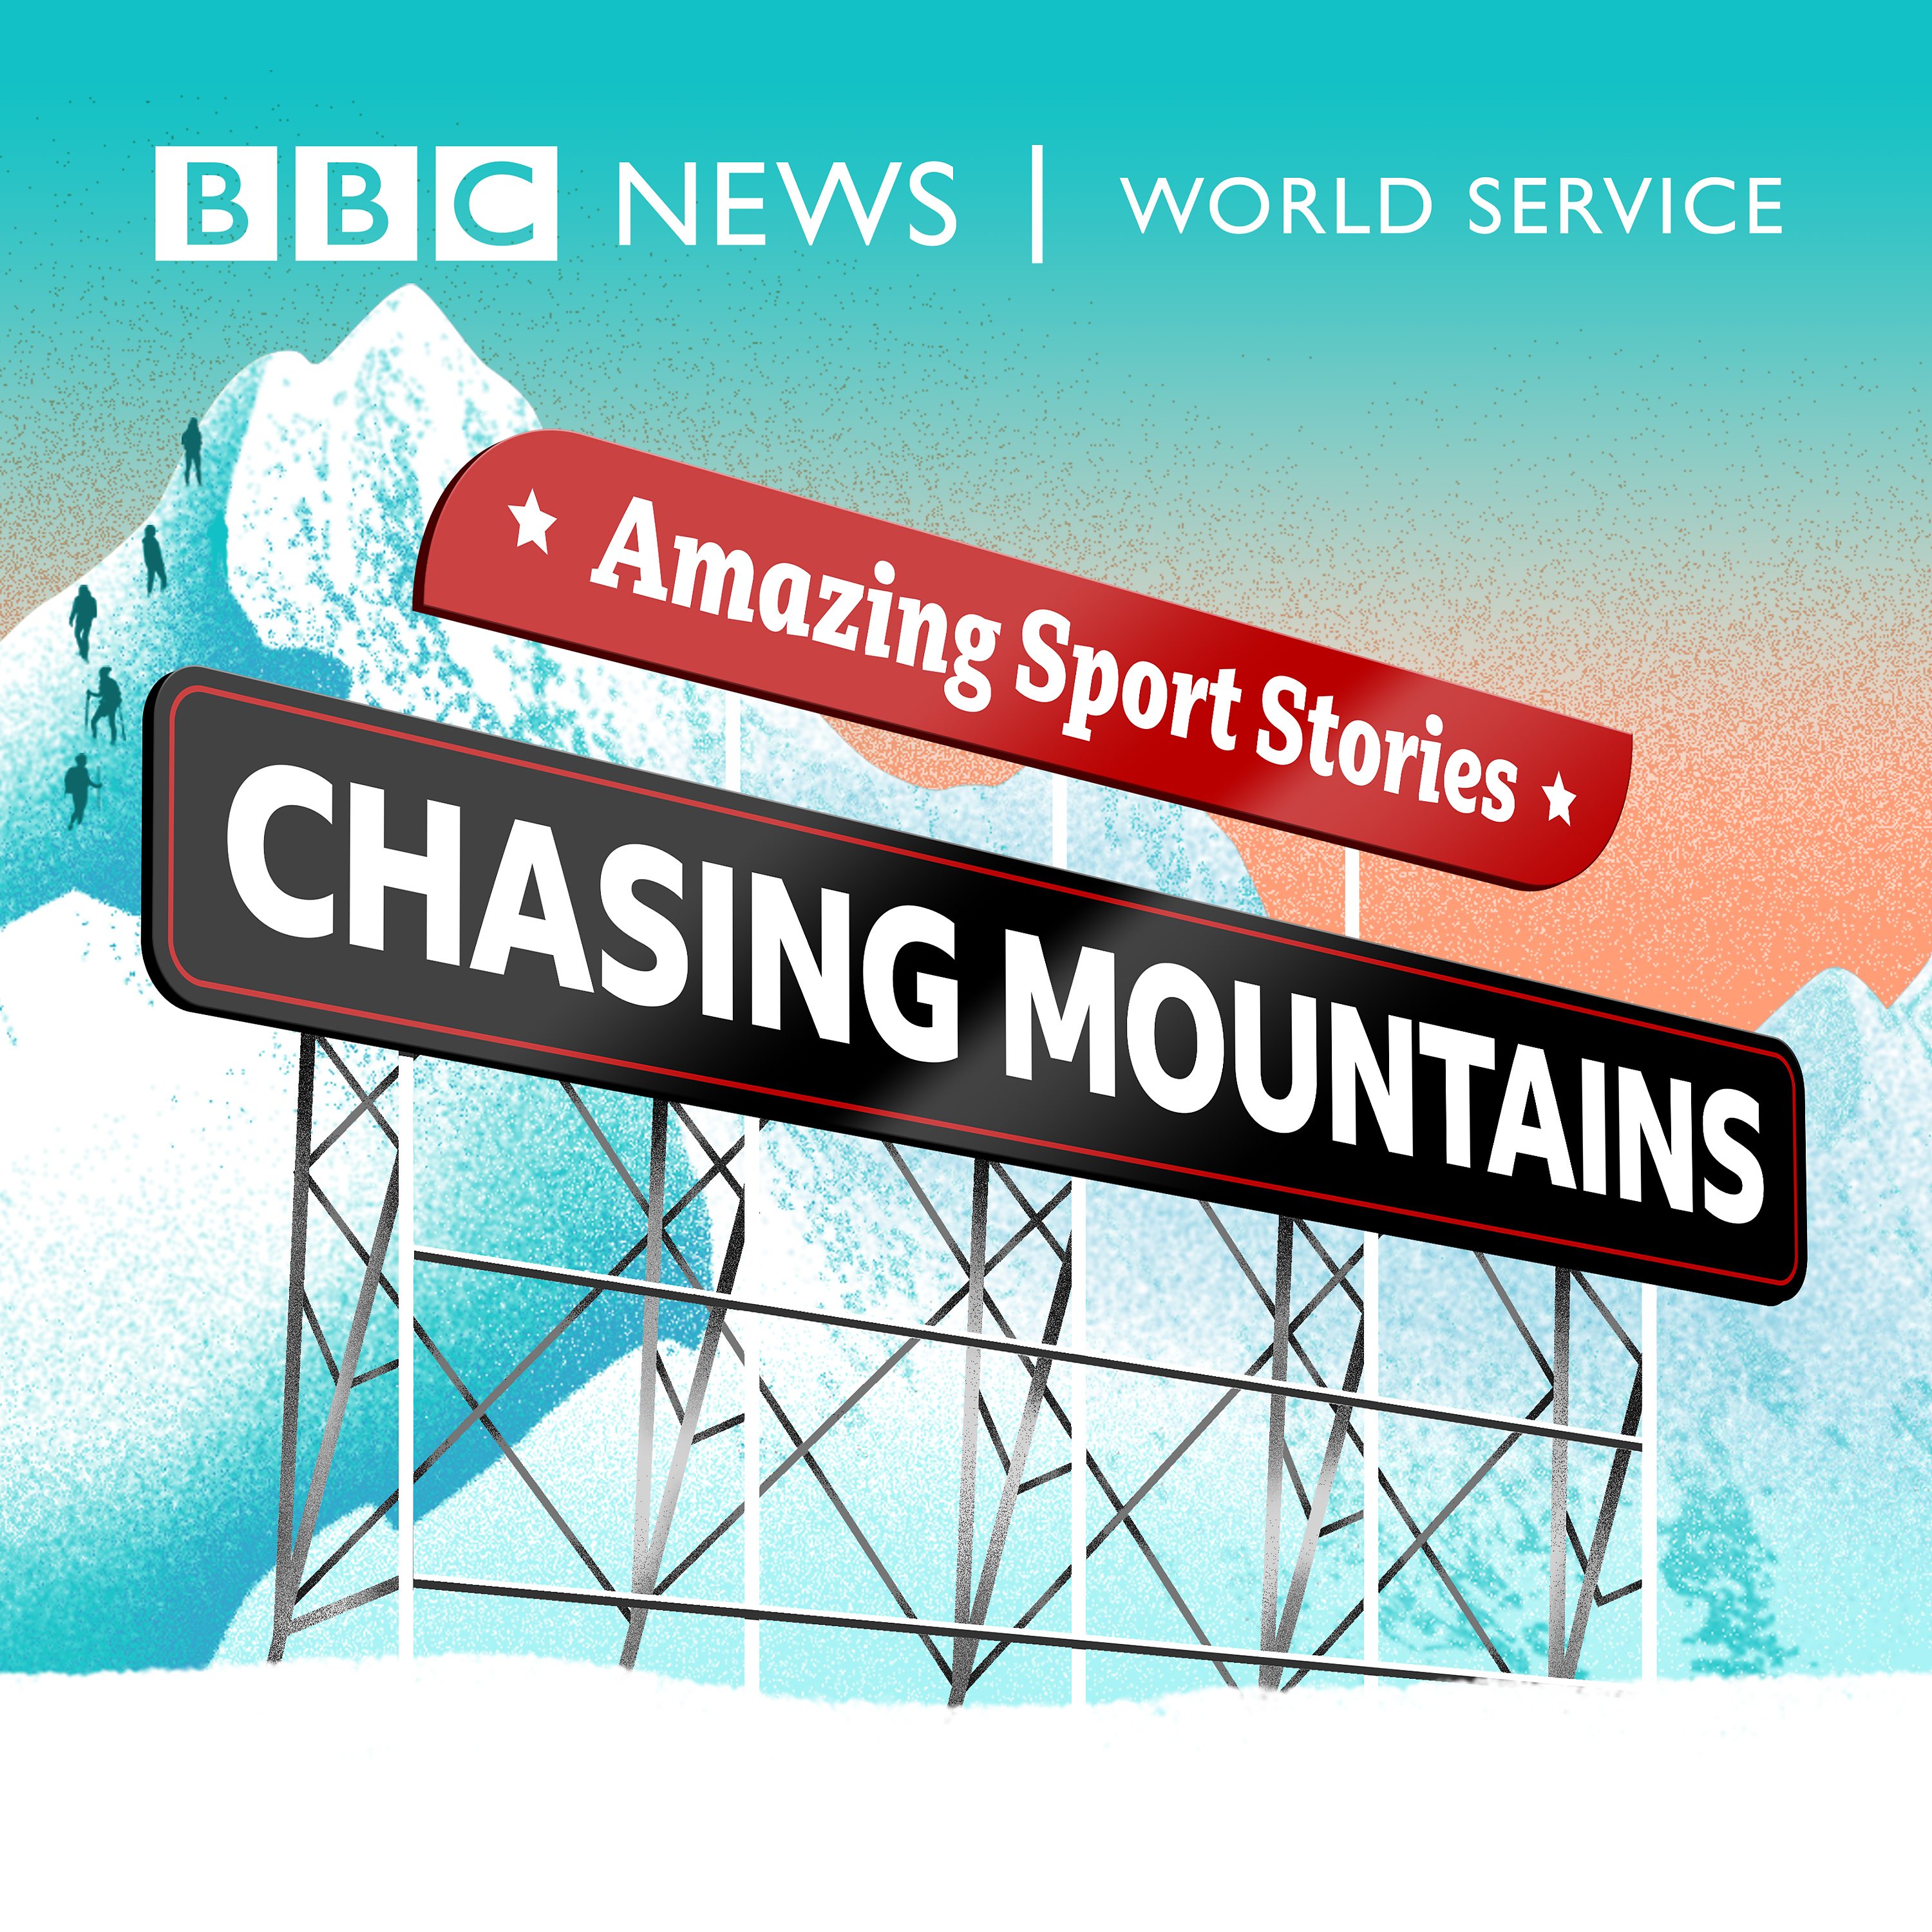 Amazing Sport Stories, including Chasing Mountains